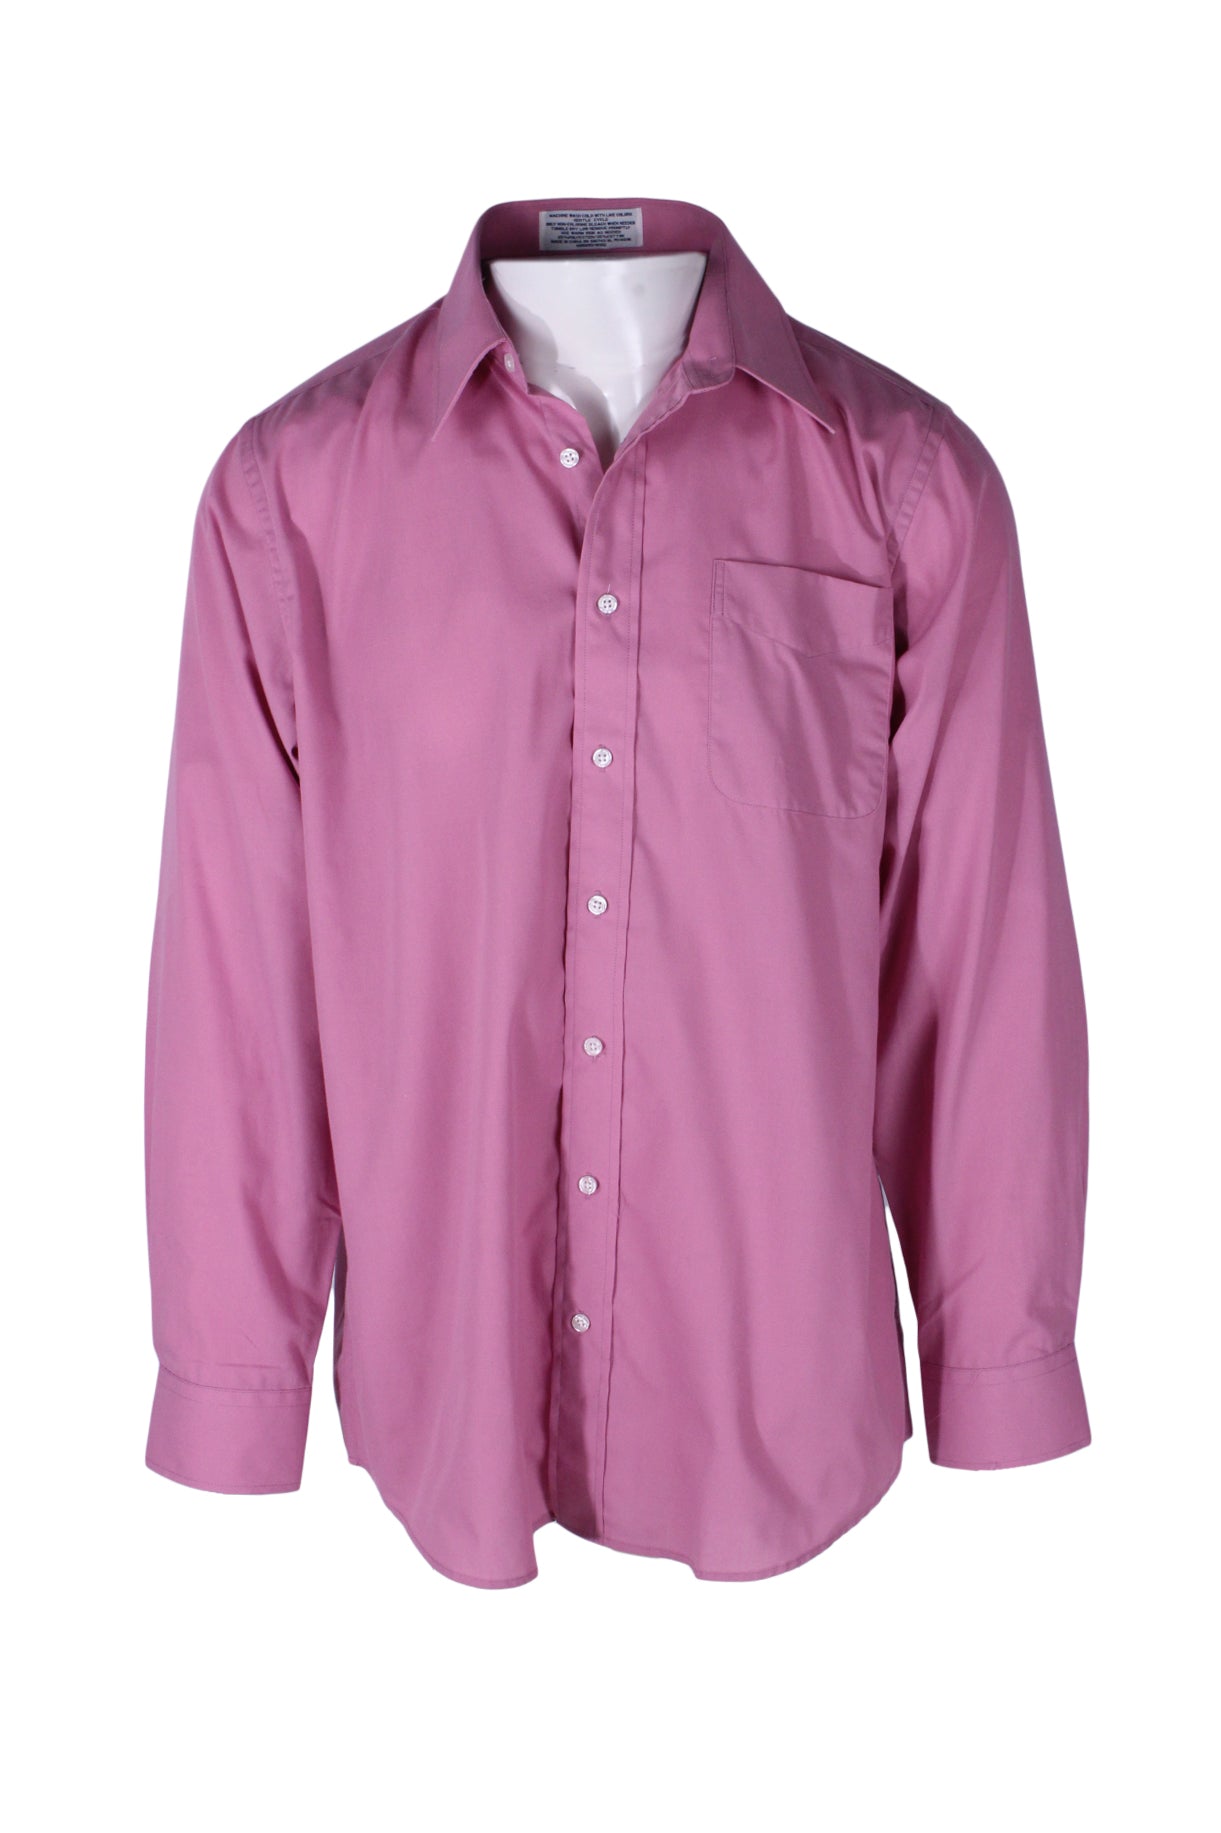 front angle of vintage irvine park peony long sleeve button down shirt on masc mannequin torso. features long pointed collar, buttoned cuffs, and single pocket over heart. 